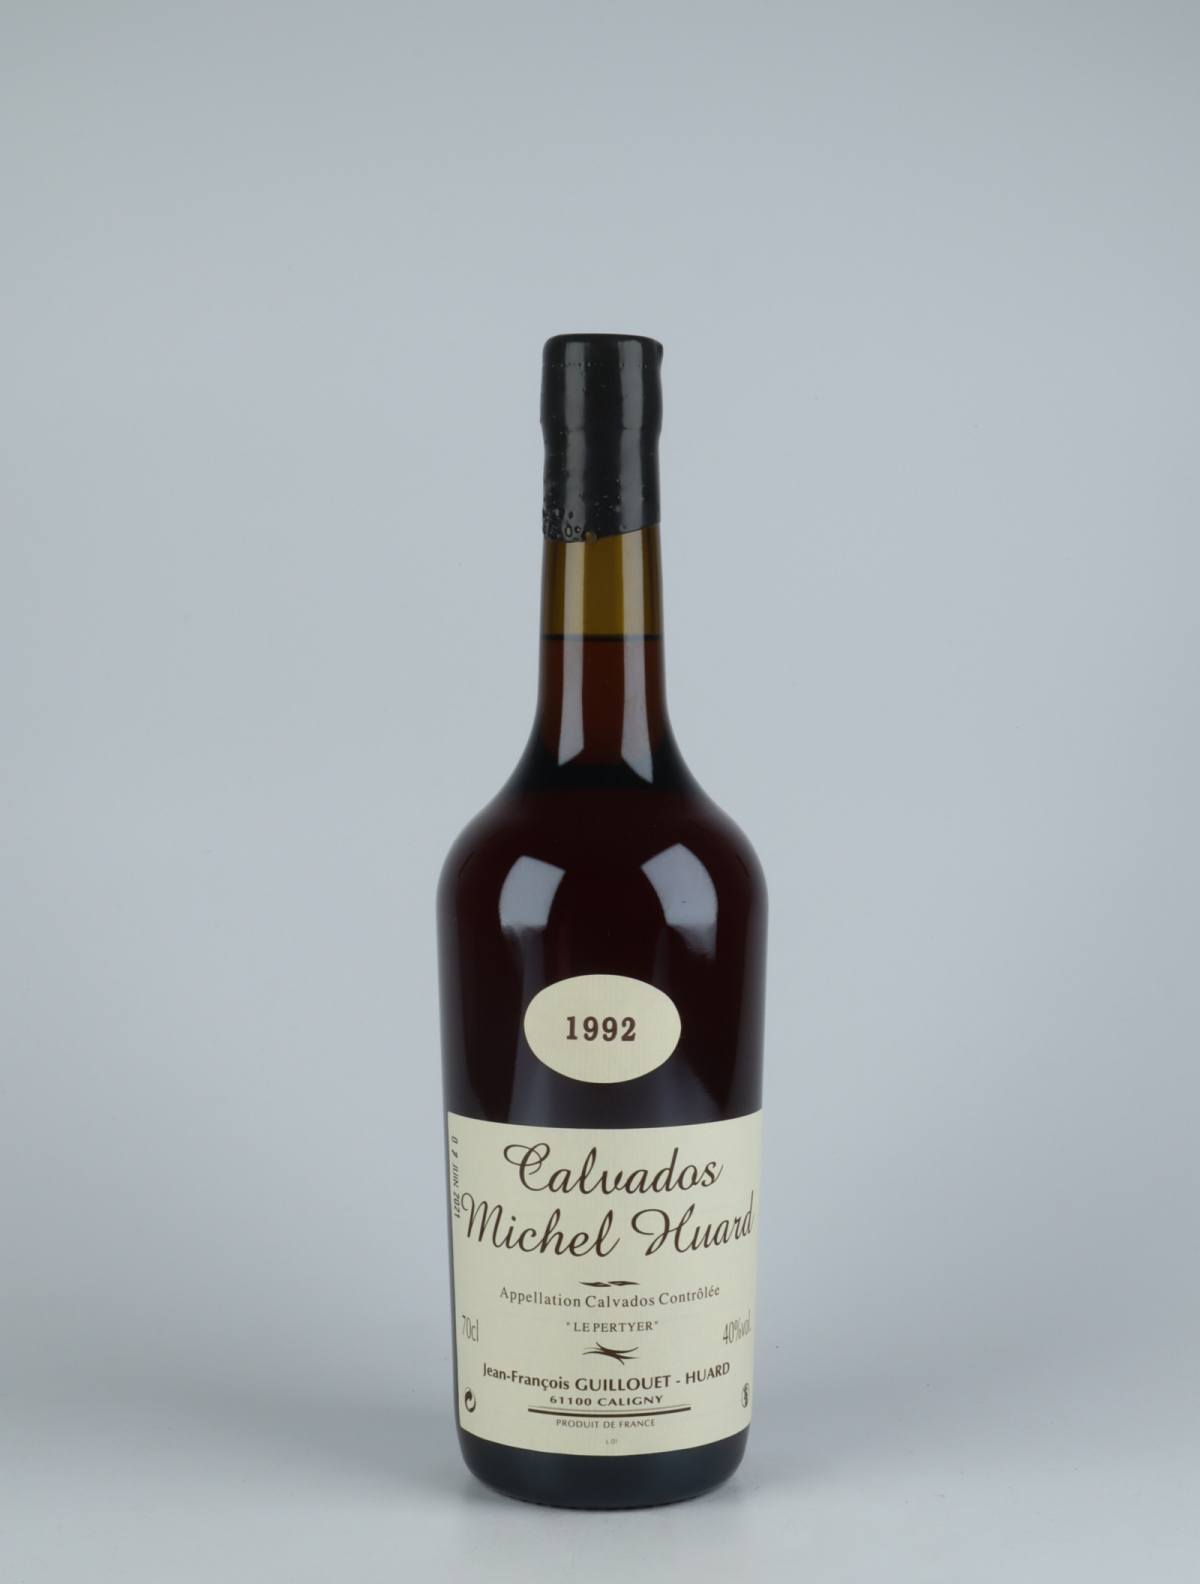 A bottle 1992 Calvados Spirits from Michel Huard, Normandy in France